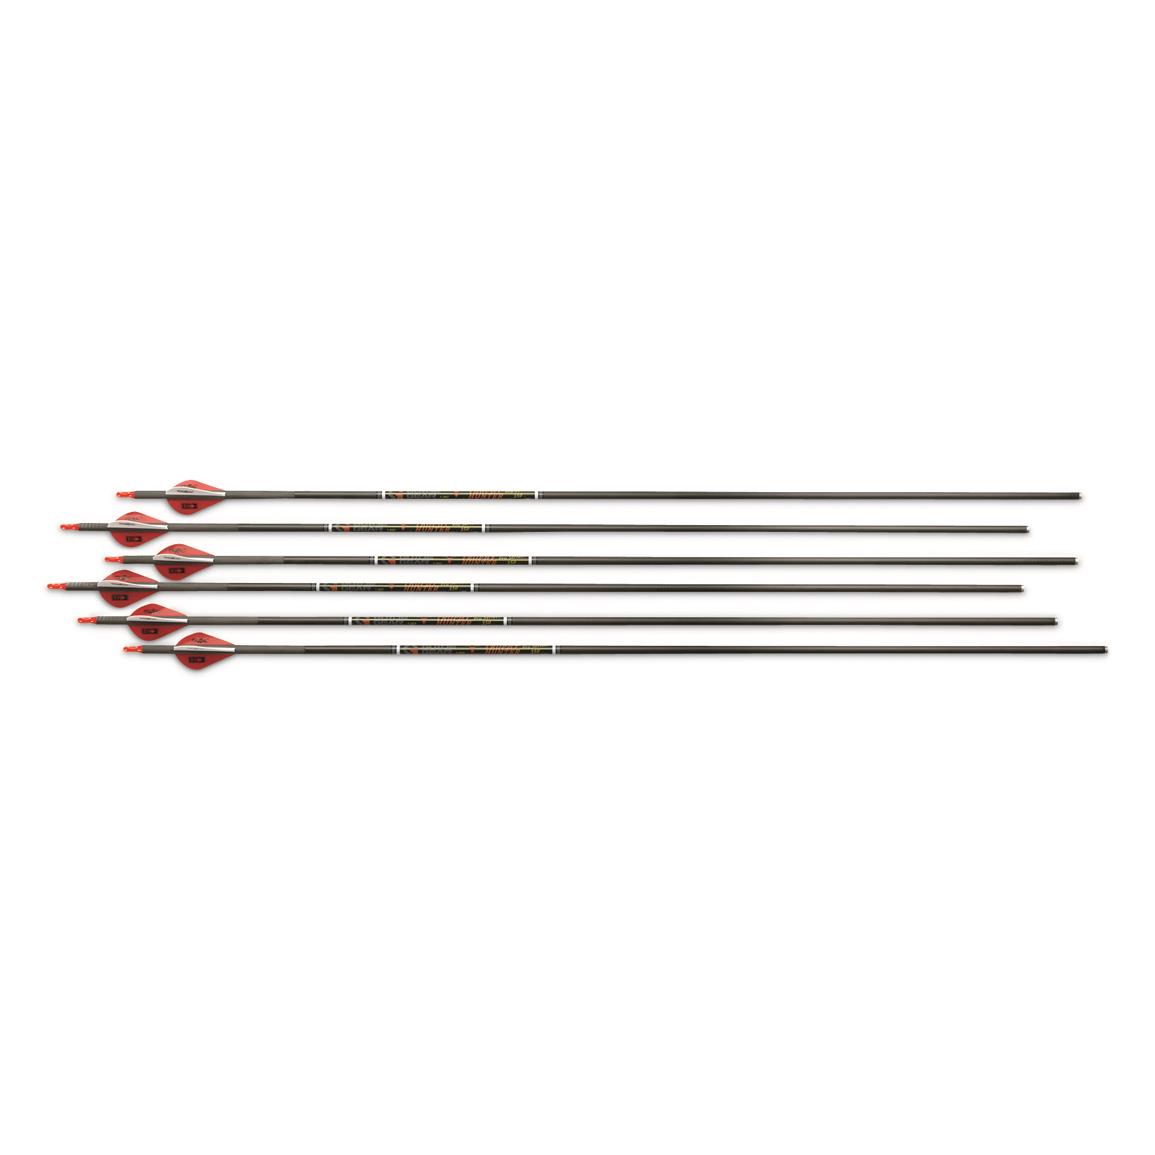 CenterPoint Carbon Crossbow Arrows, 400 Grain, 20 Inch, 6 Pack - 699715 ...